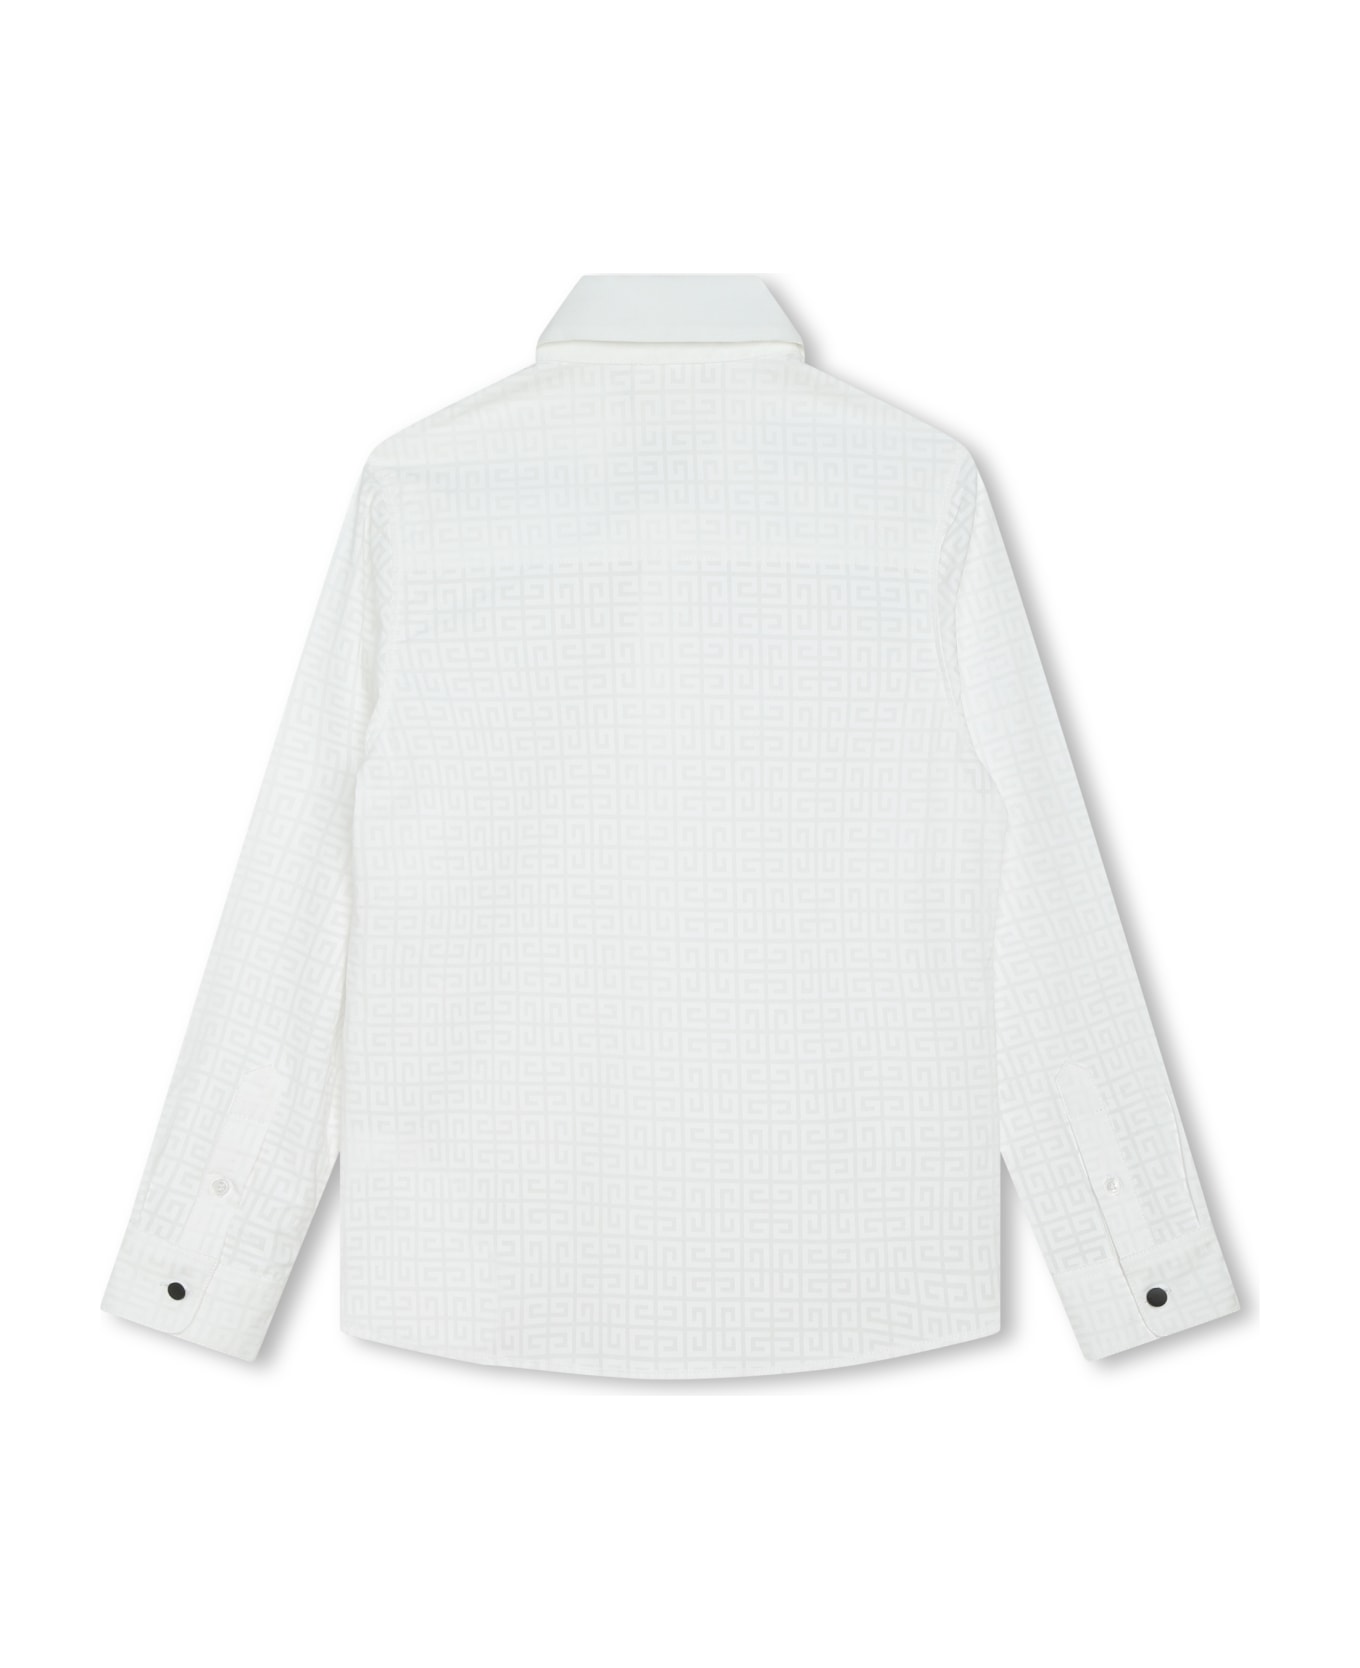 Givenchy slides Shirt With 4g Motif - White